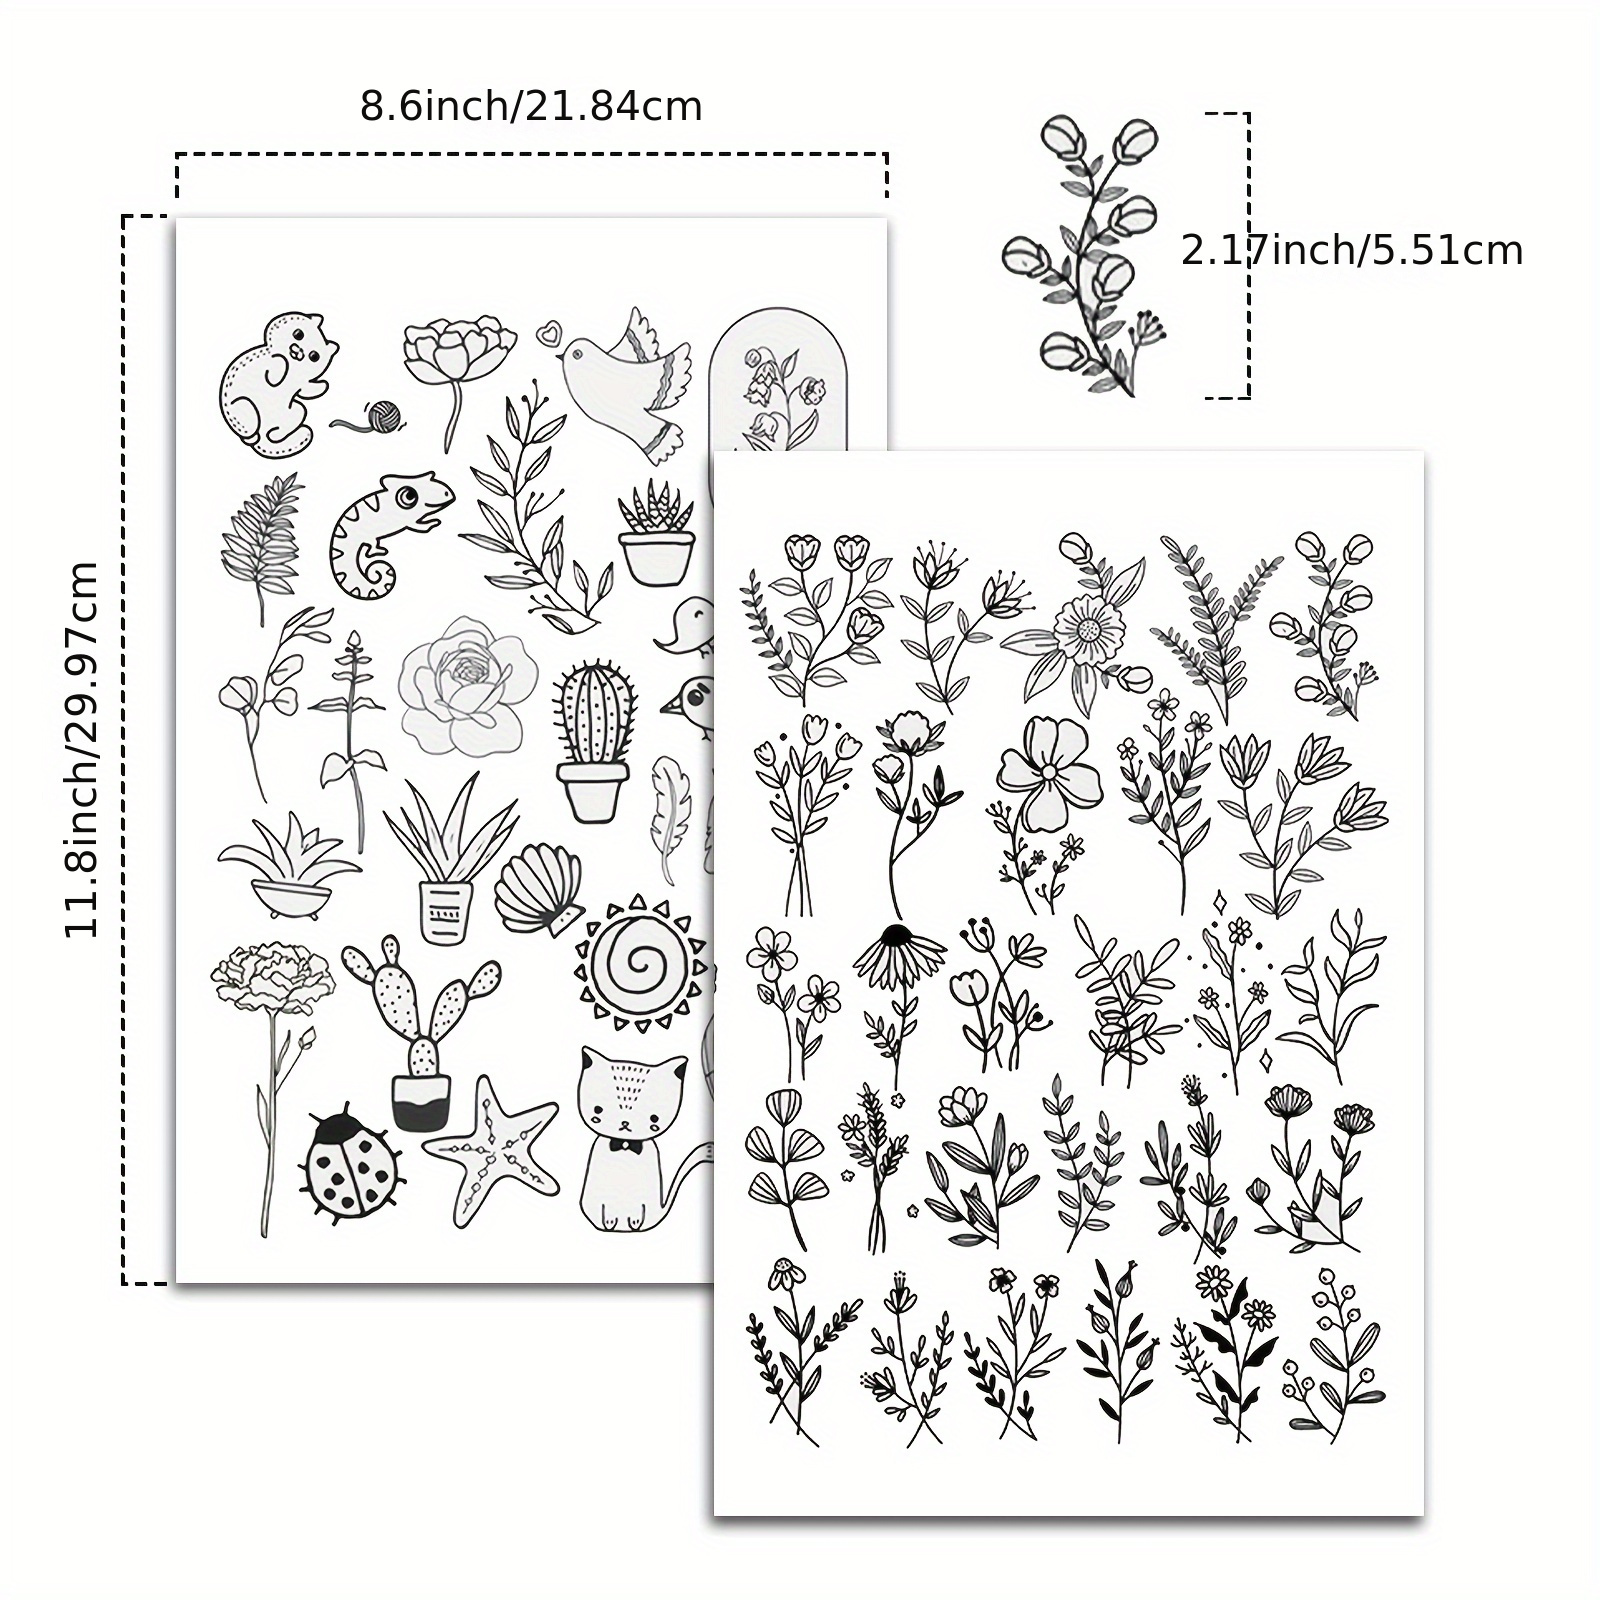  46Pcs Water Soluble Embroidery Patterns,Embroidery